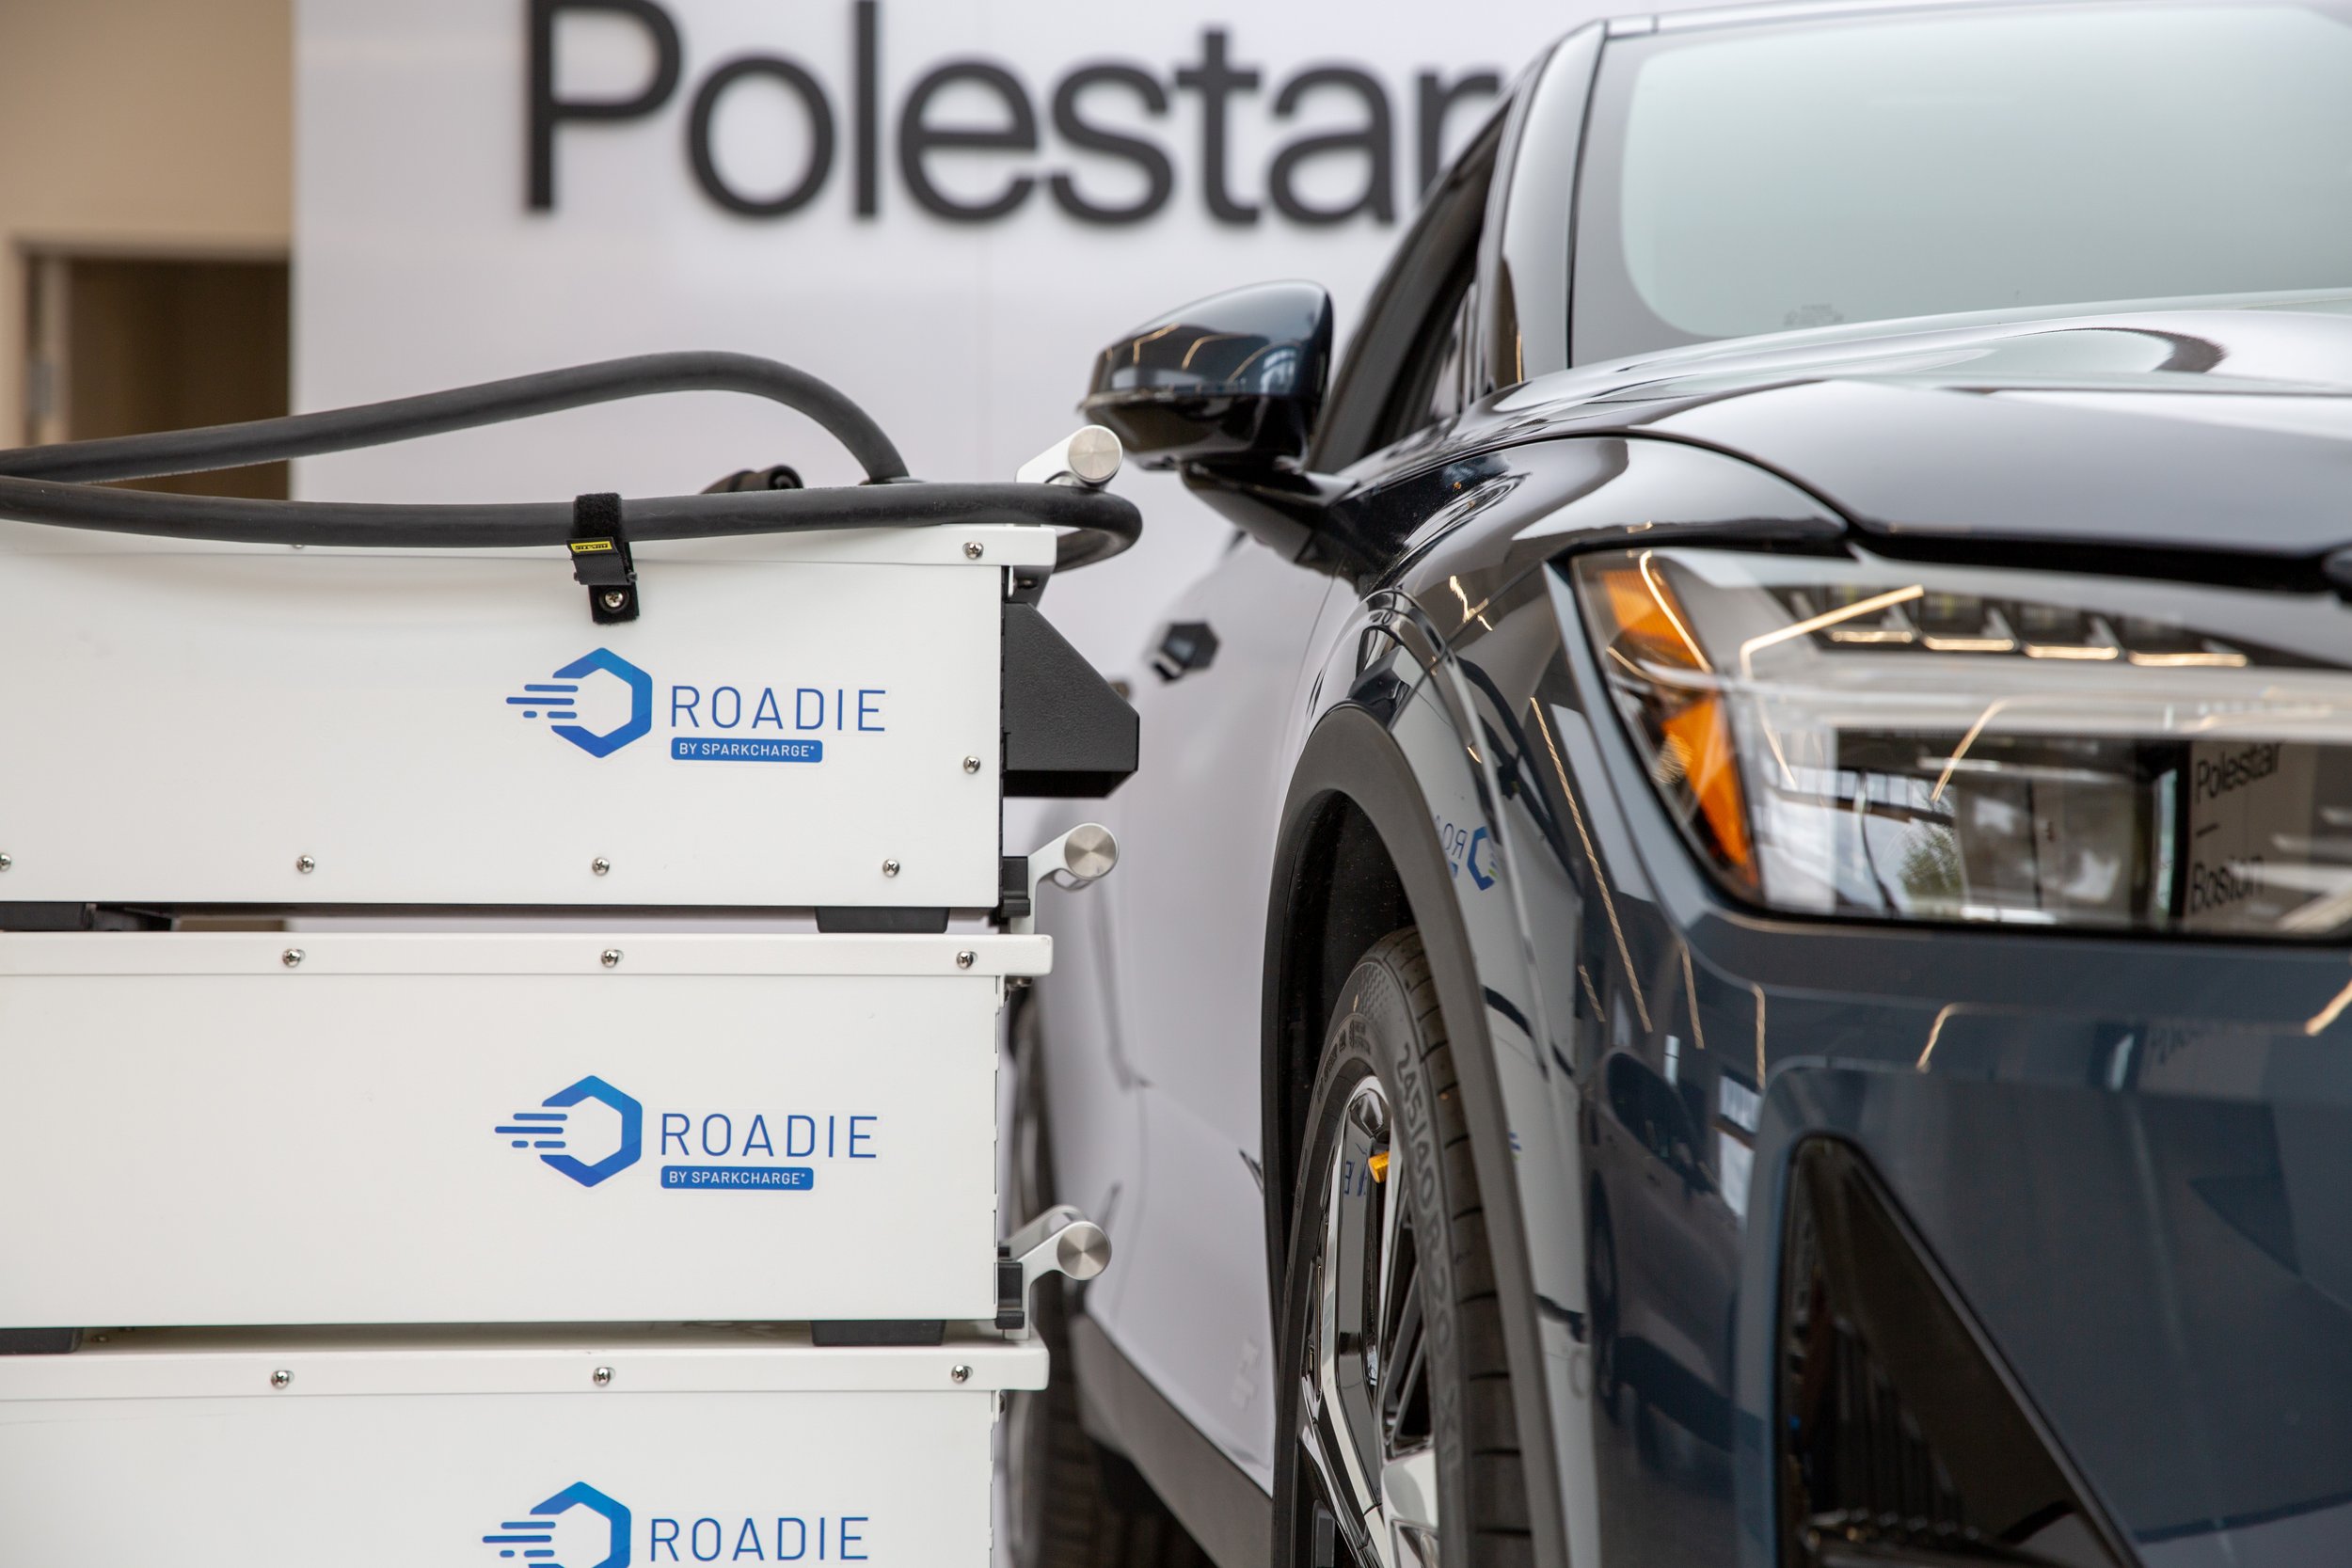 SparkCharge Introduces 'The Roadie' Portable EV Charging System